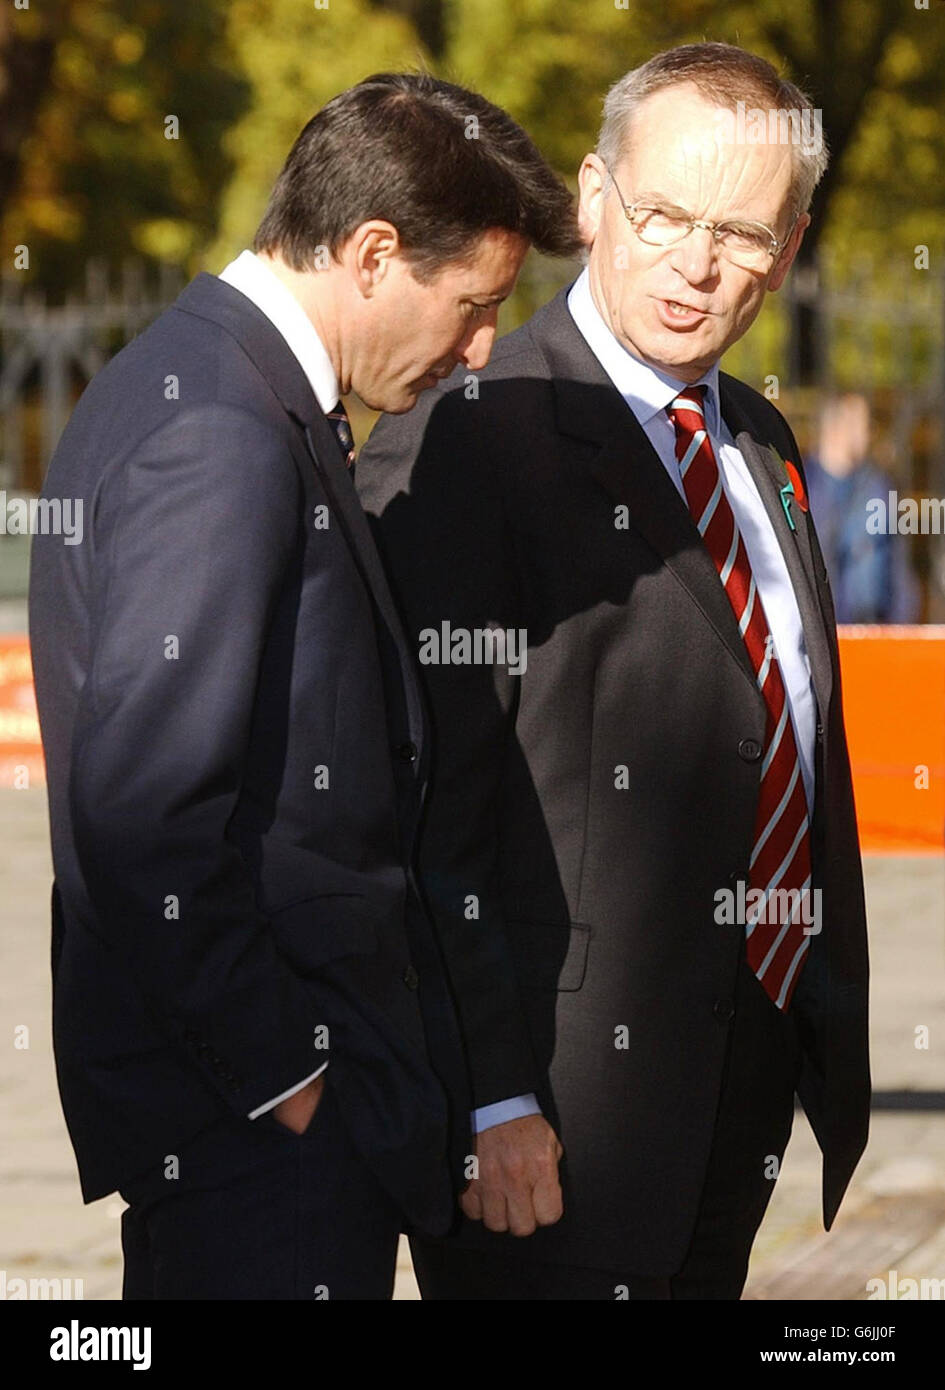 Lord Archer and Lord Coe (left) arrive for the memorial service of the late husband of former Prime Minister, Margaret Thatcher, Sir Denis Thatcher, in The Guards Chapel, Birdcage Walk, London. Sir Denis died in June, aged 88 having undergone major heart surgery some six months earlier, from which it was thought he had made a good recovery. Stock Photo